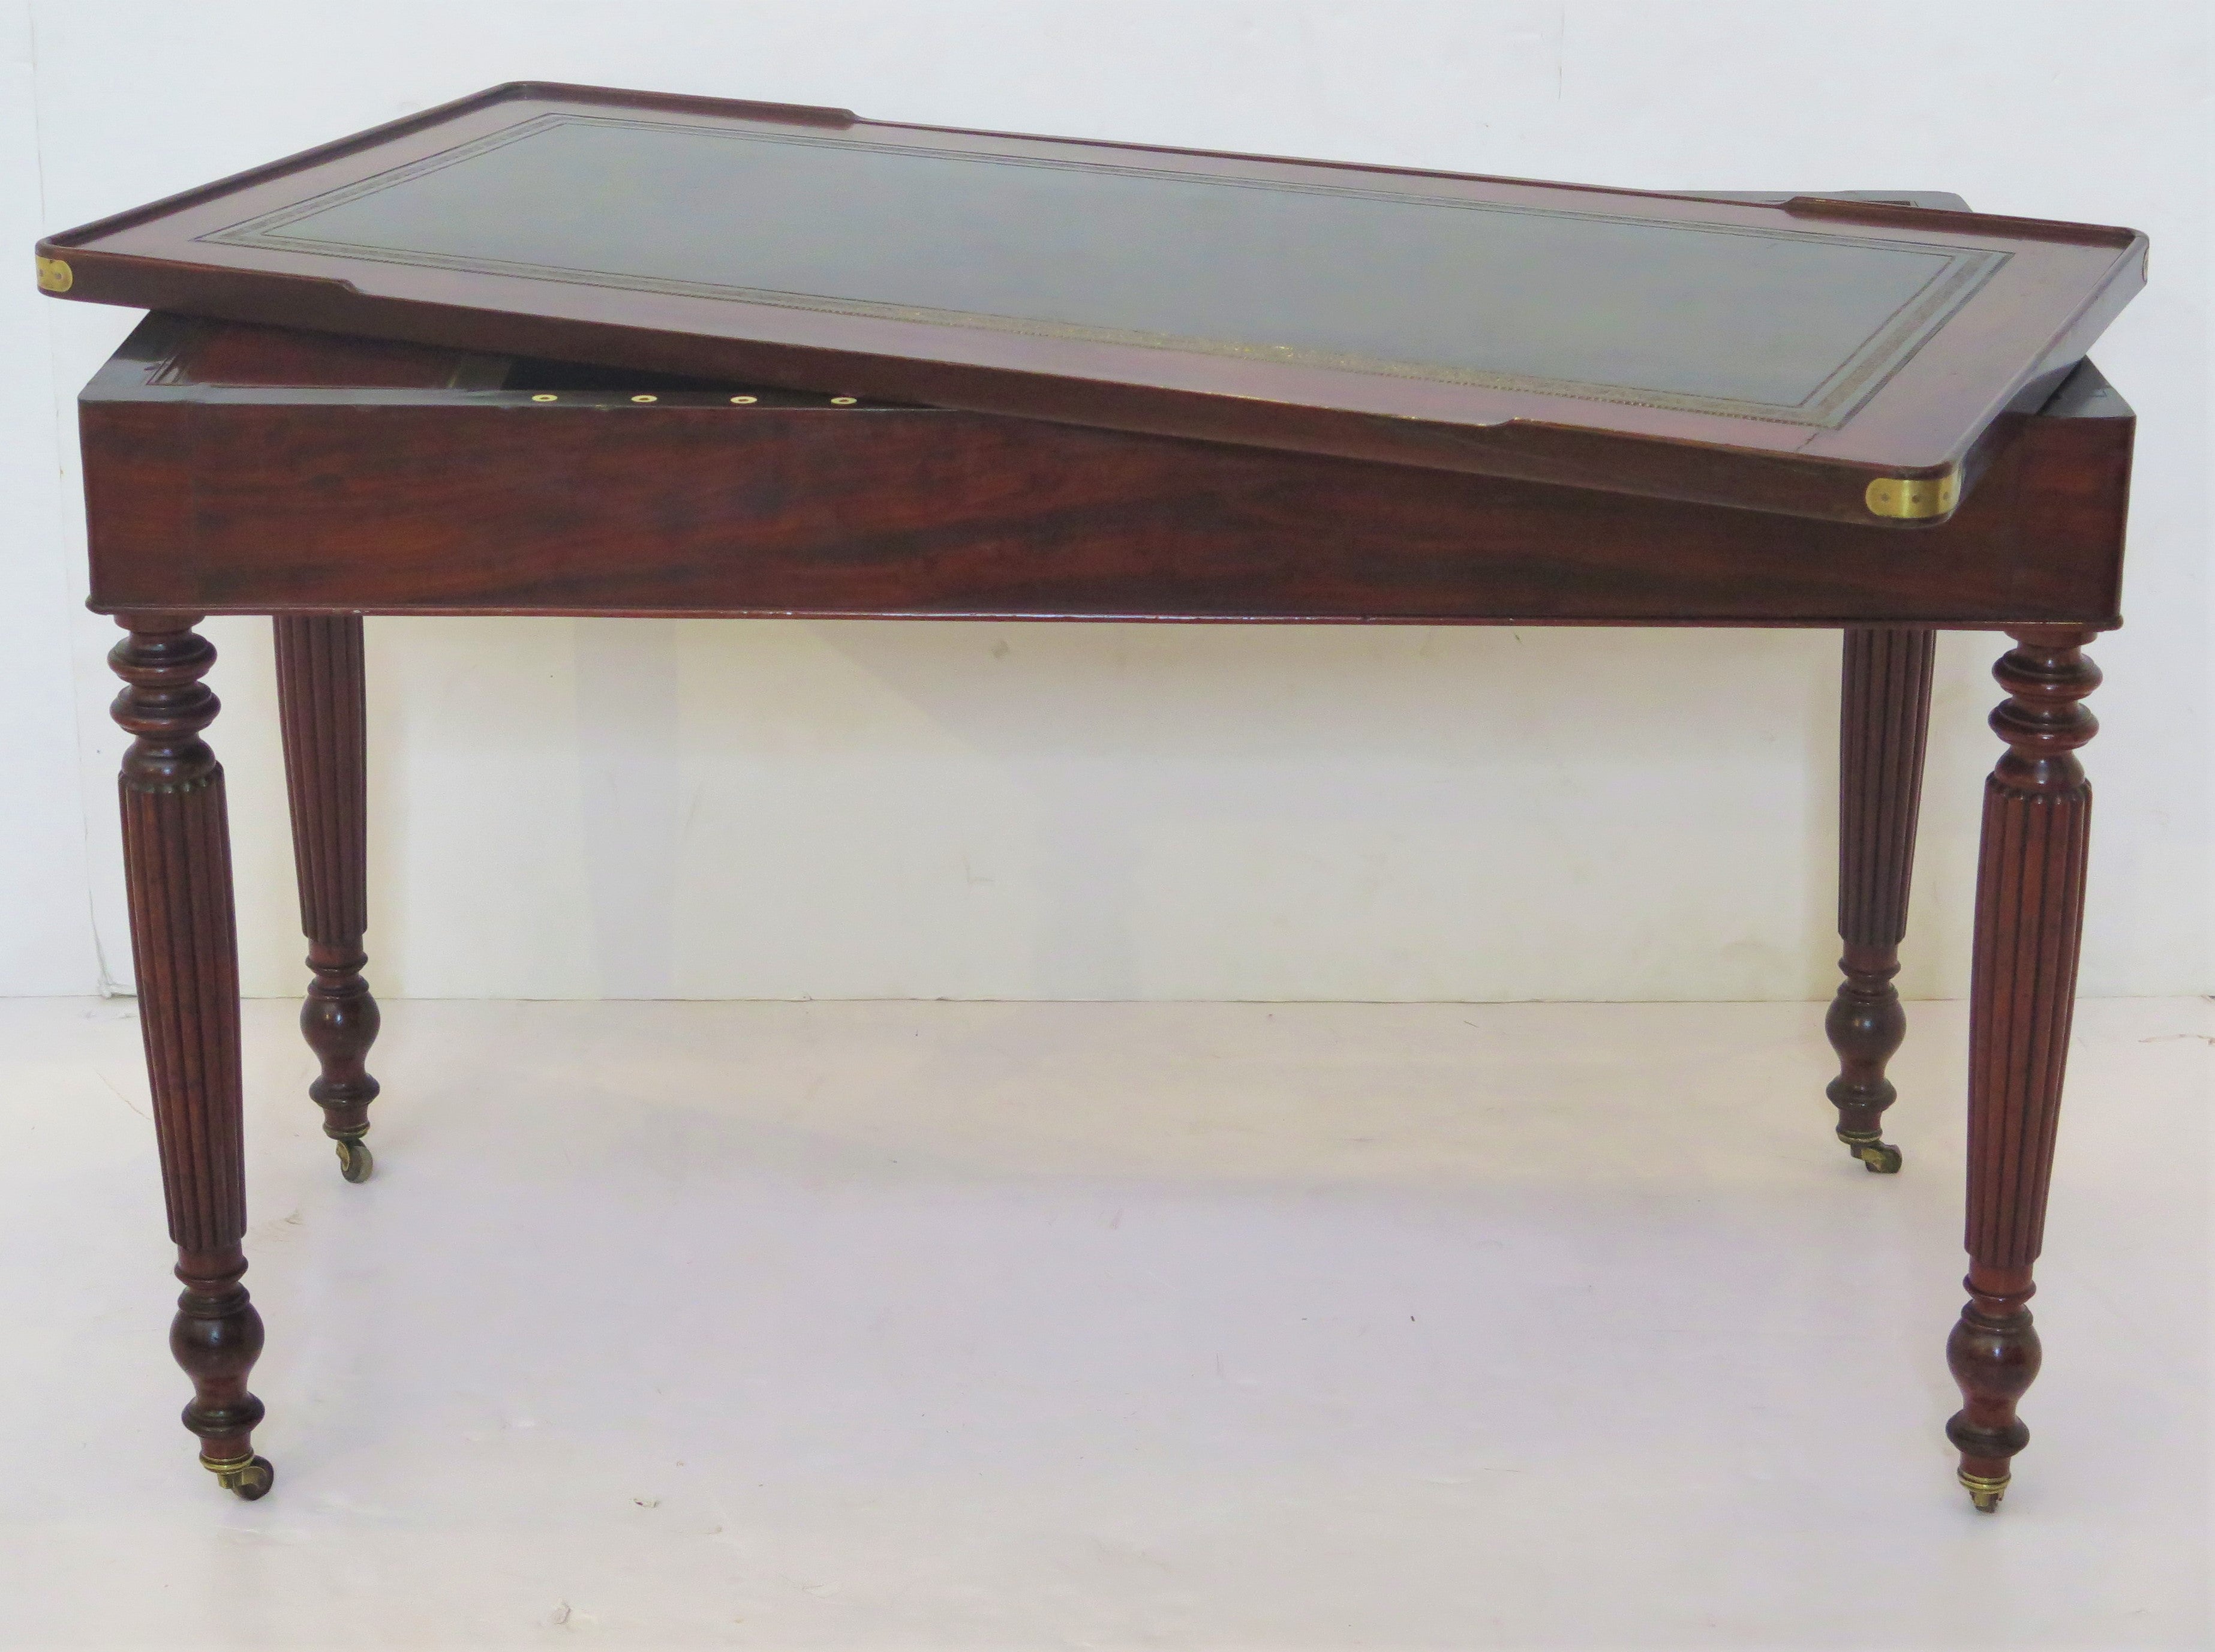 English Regency Tric-Trac Games Table in the Manner of Gillows